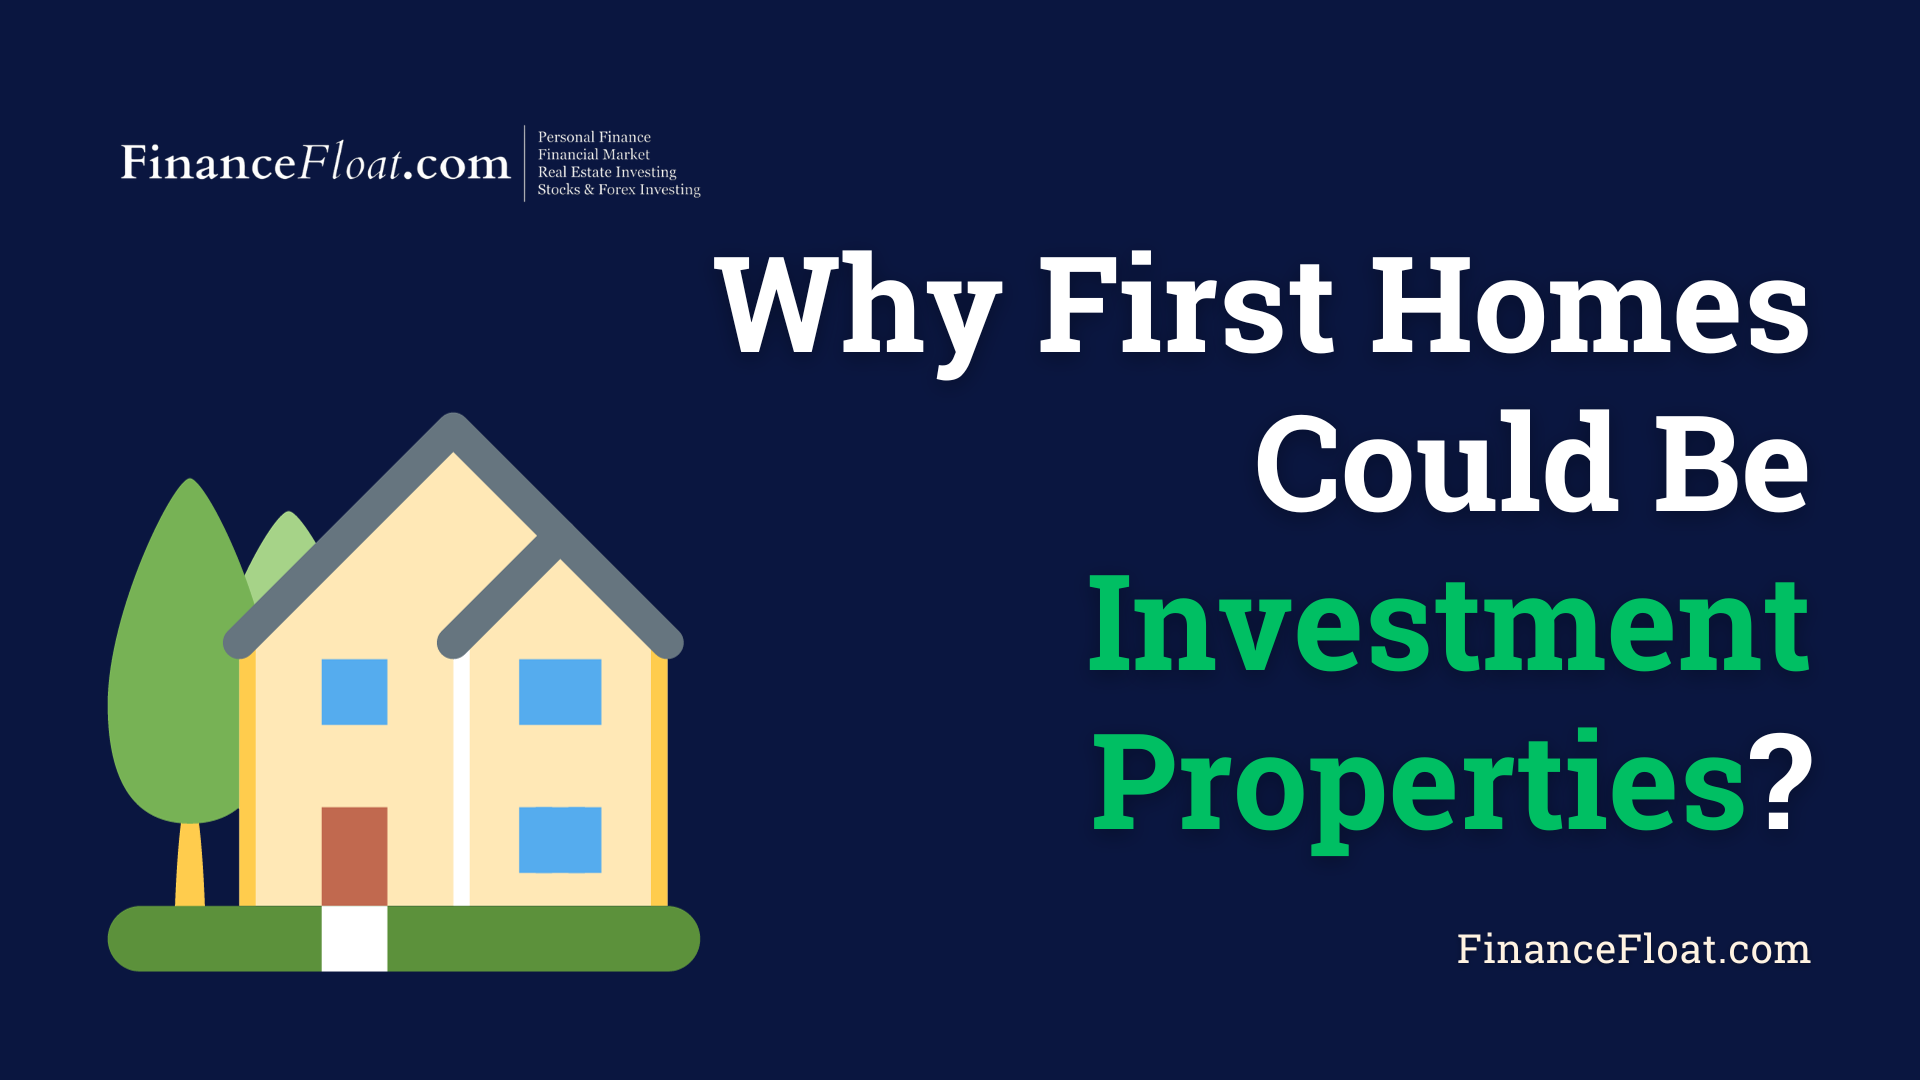 Why First Homes Could Be Investment Properties